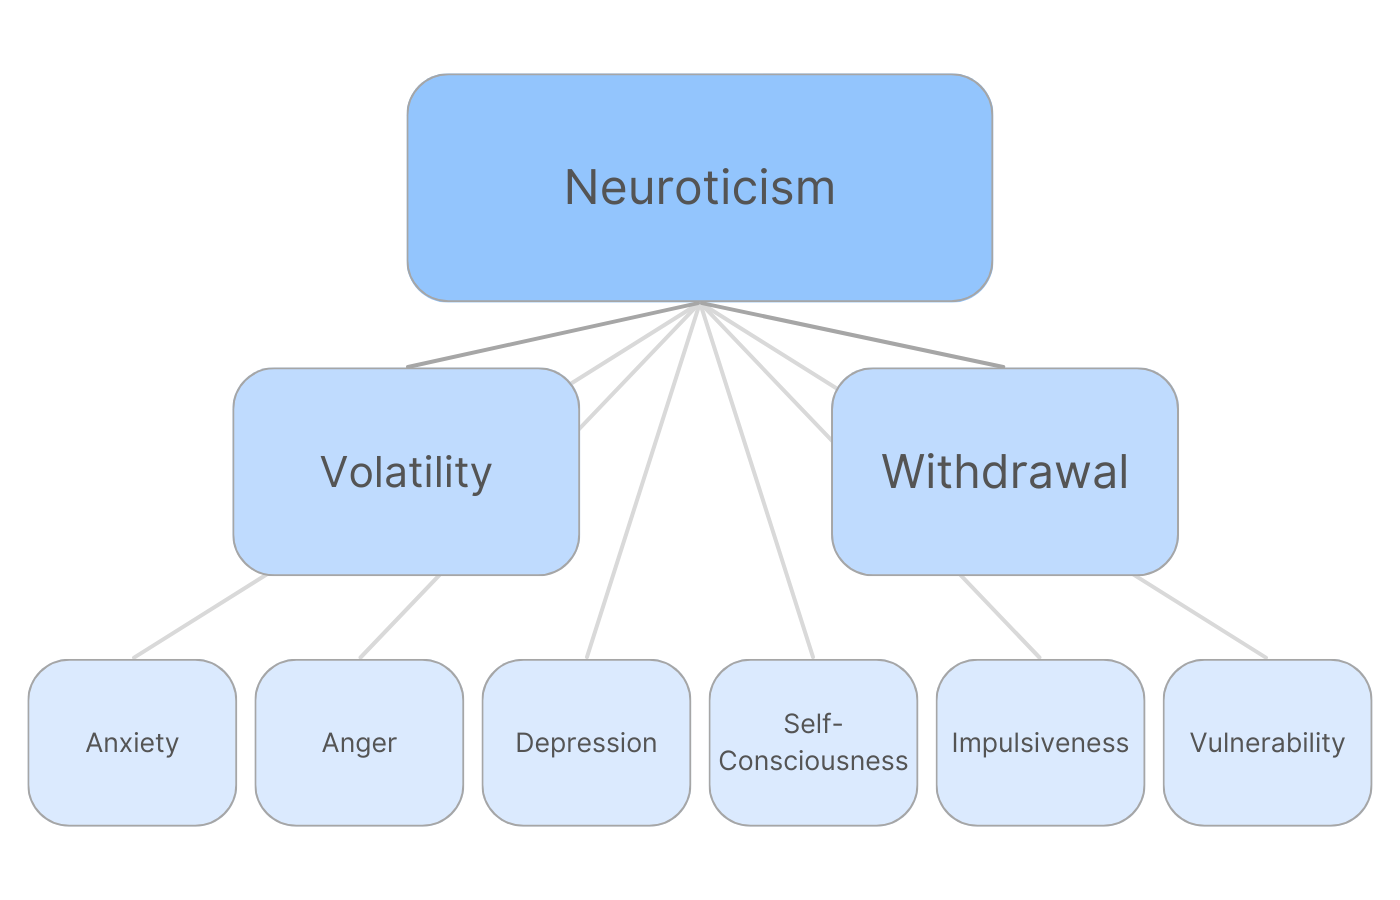 The Neuroticism dimension and its aspects and facets